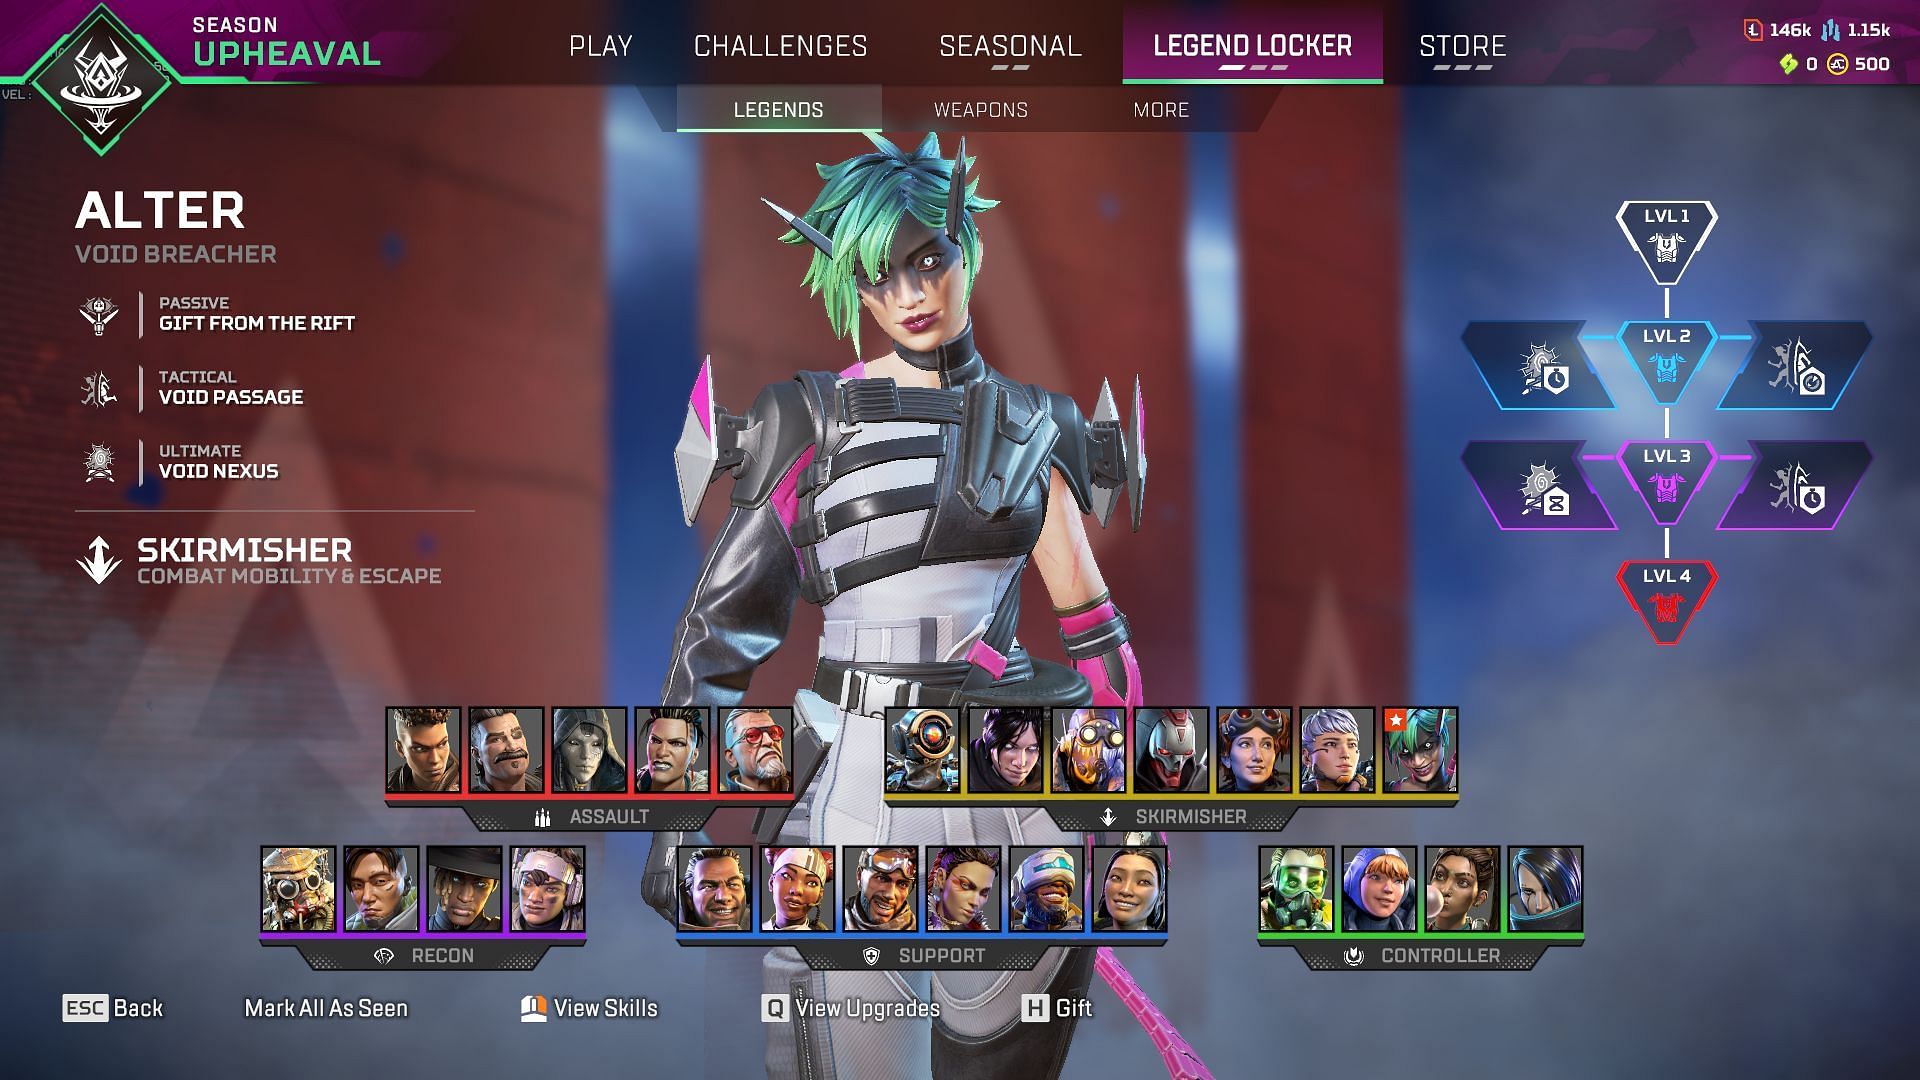 Alter&#039;s creative outplay potential makes her one of the best legends for Apex Legends solos (Image via Electronic Arts)